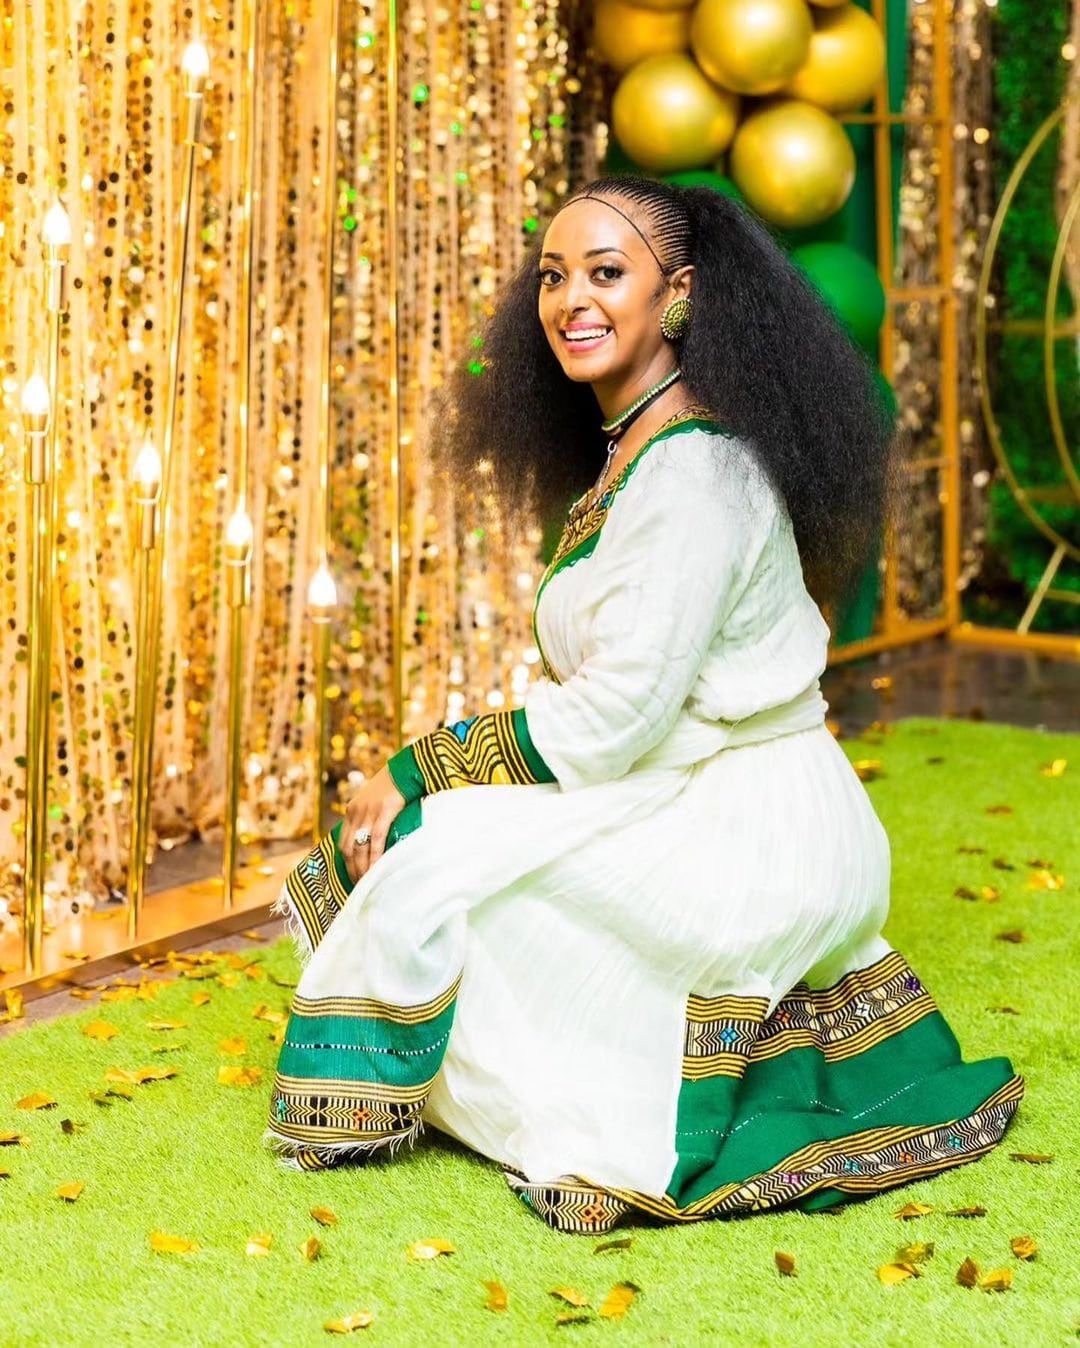 Lush Elegance: Handwoven Green Habesha Dress - Traditional Beauty with Exquisite Embroidery!